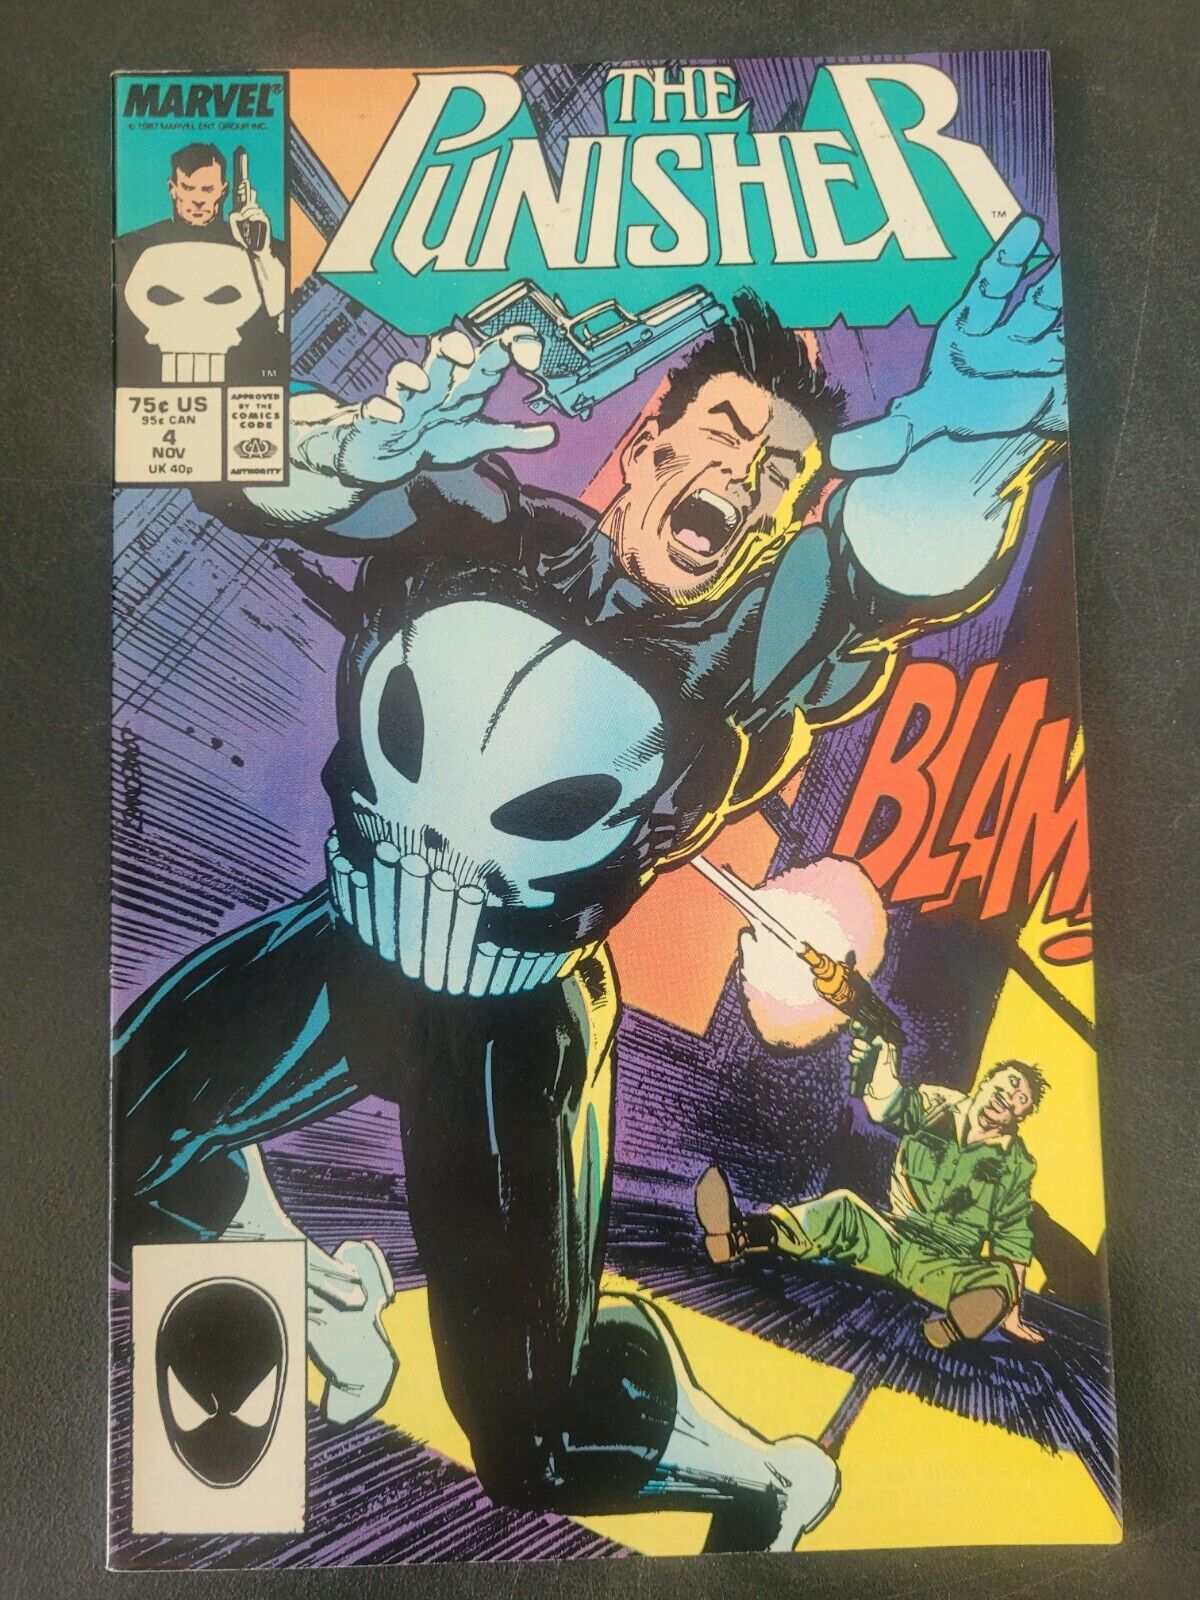 THE PUNISHER #4 (1987) MARVEL COMICS 1ST APPEARANCE OF MICROCHIP KLAUS JANSON